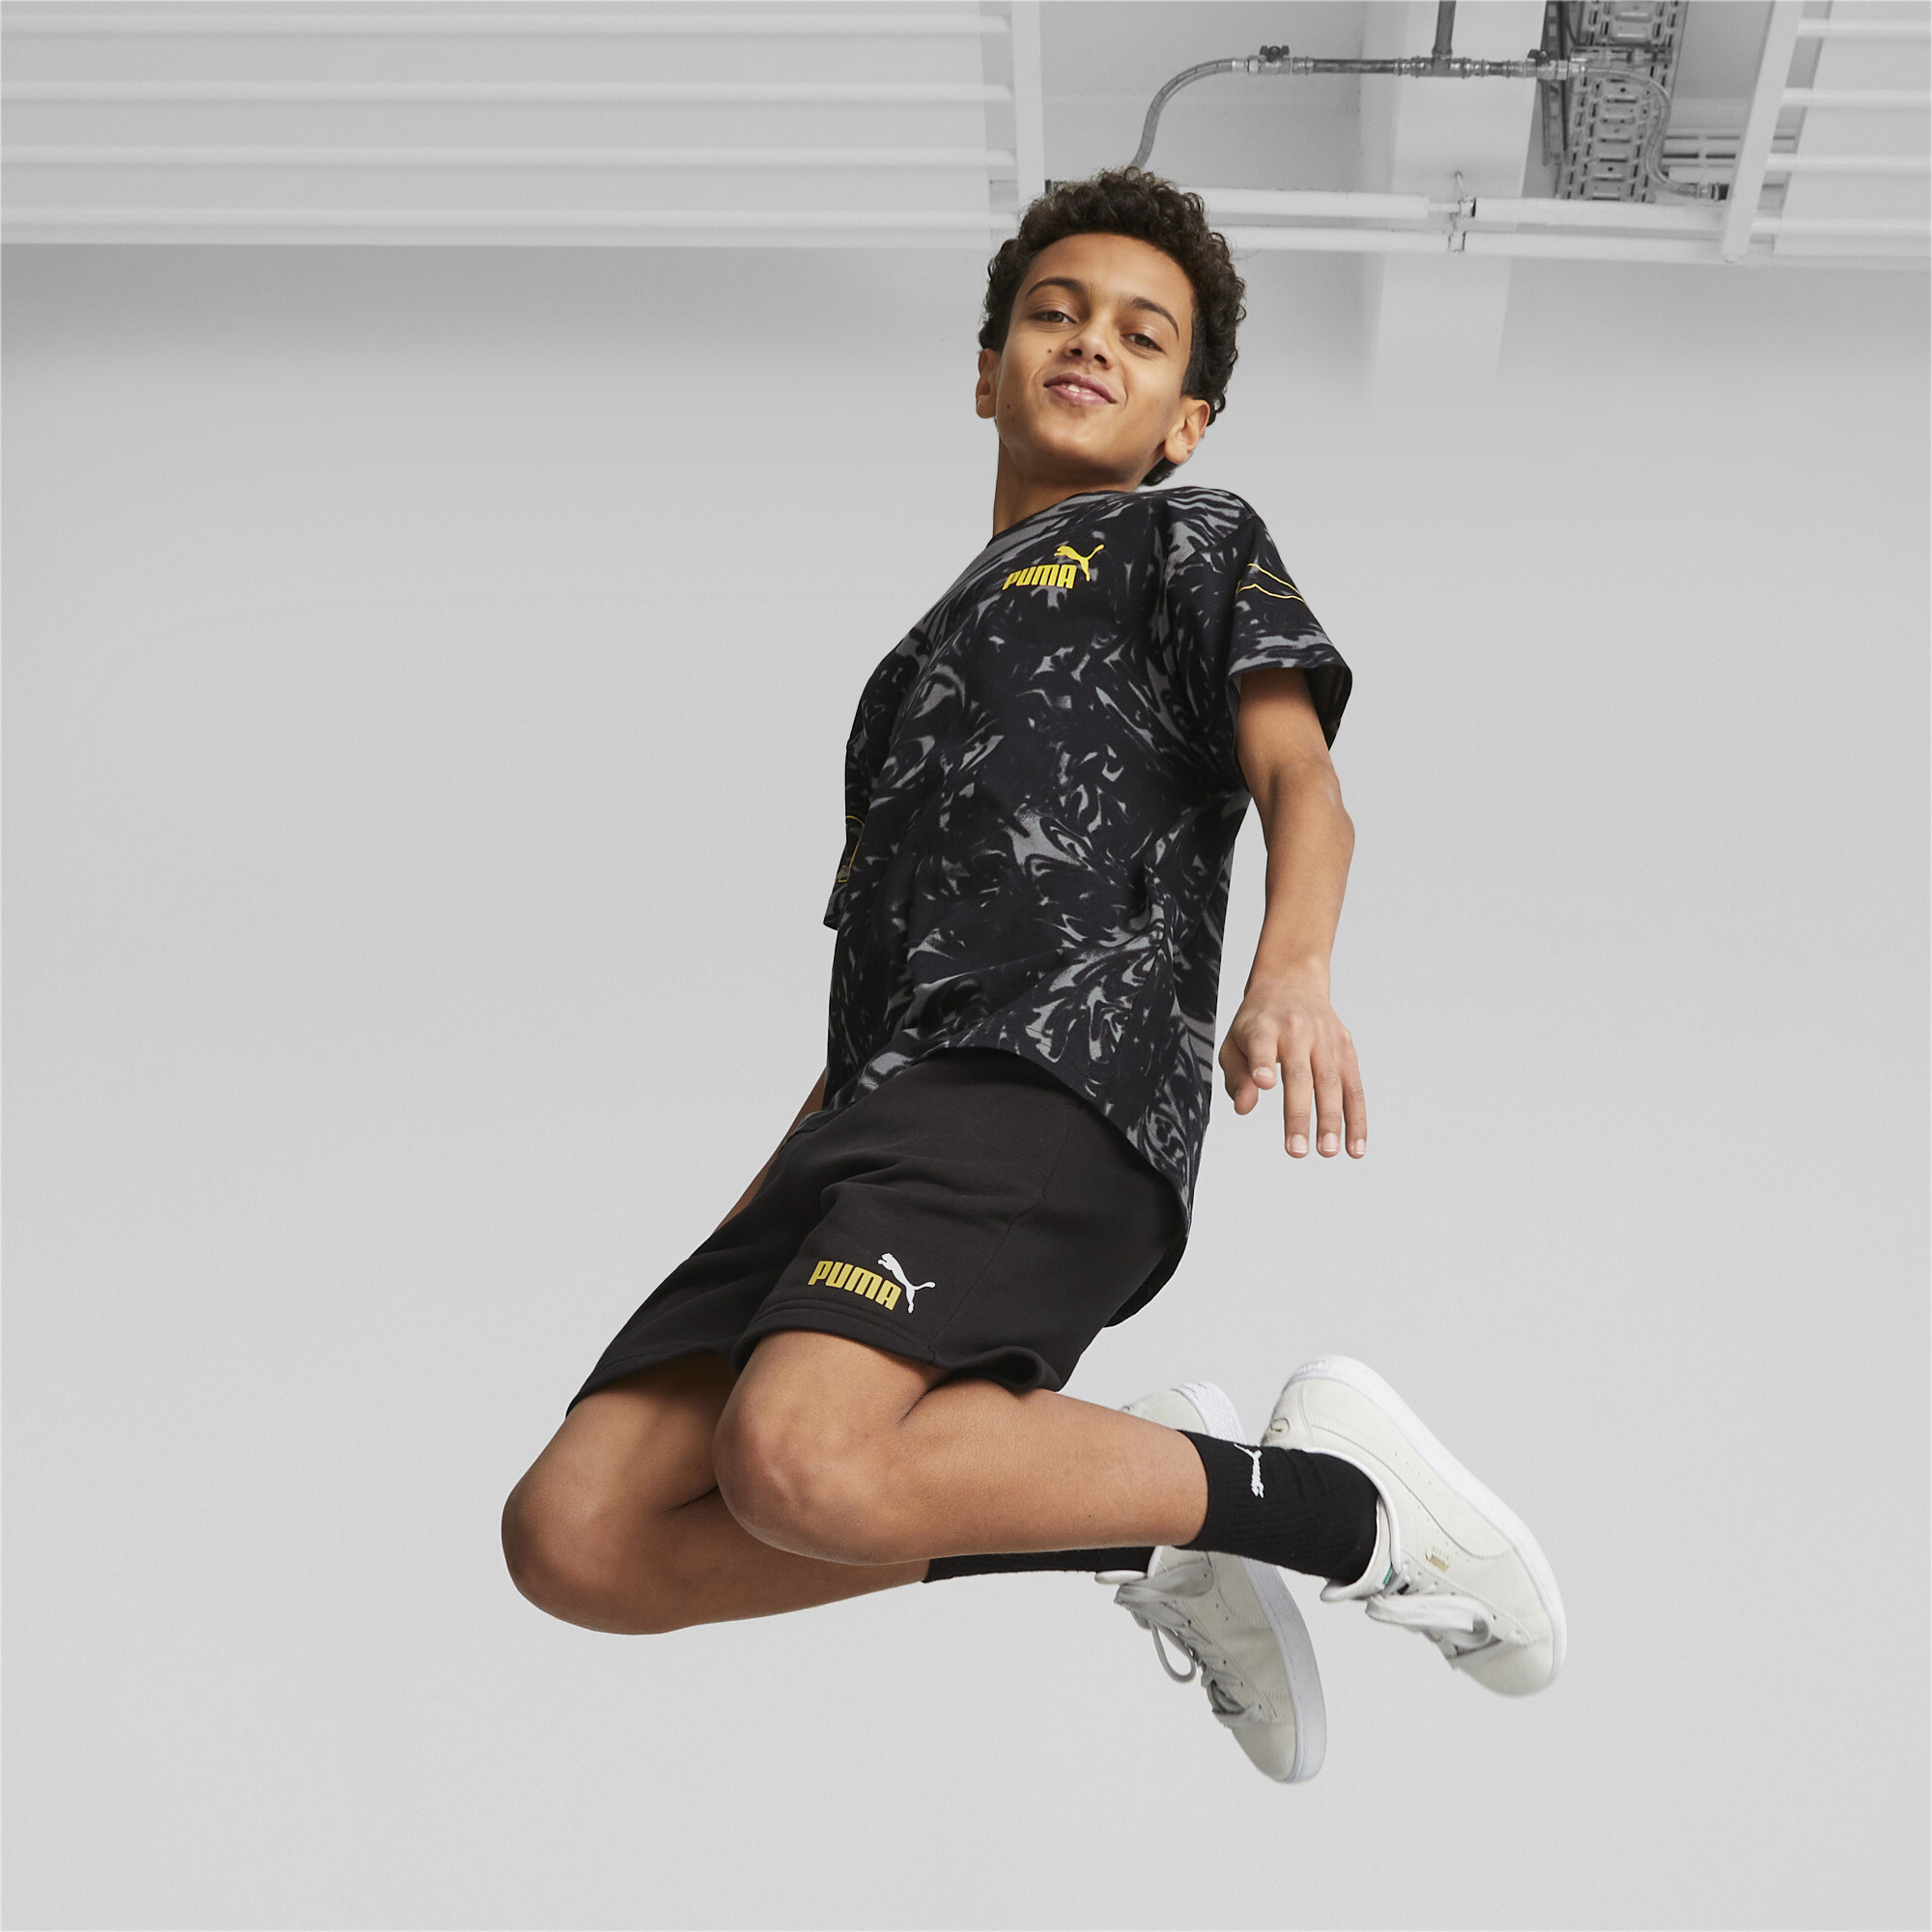 PUMA POWER SUMMER Printed T-Shirt In Black, Size 9-10 Youth